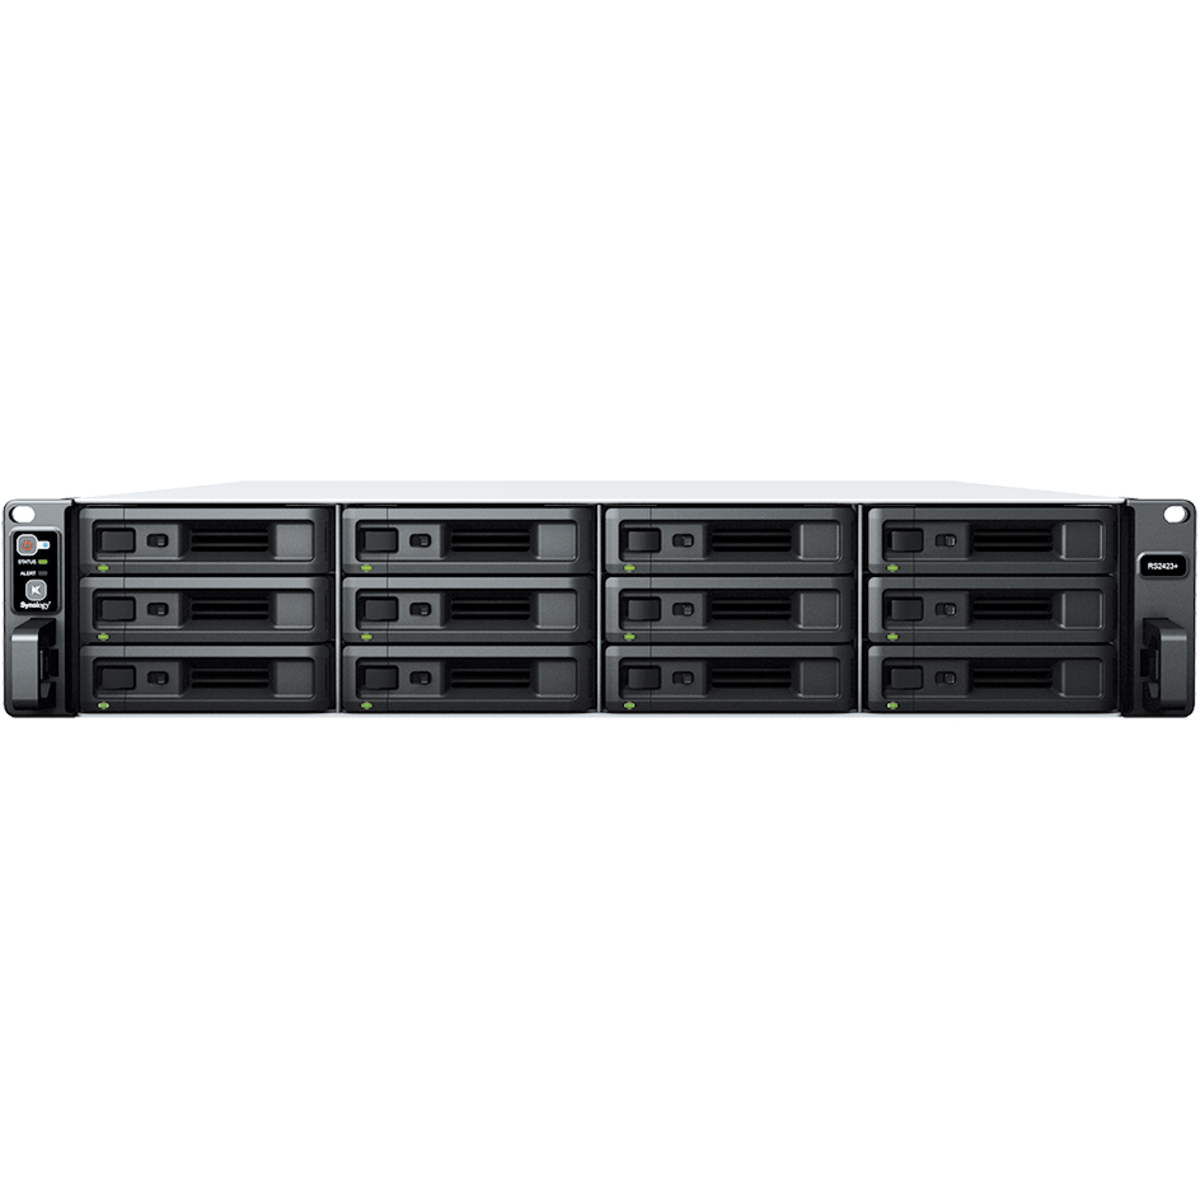 buy Synology RackStation RS2423+ 120tb RackMount NAS - Network Attached Storage Device 12x10000gb Seagate IronWolf Pro ST10000NT001 3.5 7200rpm SATA 6Gb/s HDD NAS Class Drives Installed - Burn-In Tested - ON SALE - nas headquarters buy network attached storage server device das new raid-5 free shipping simply usa RackStation RS2423+